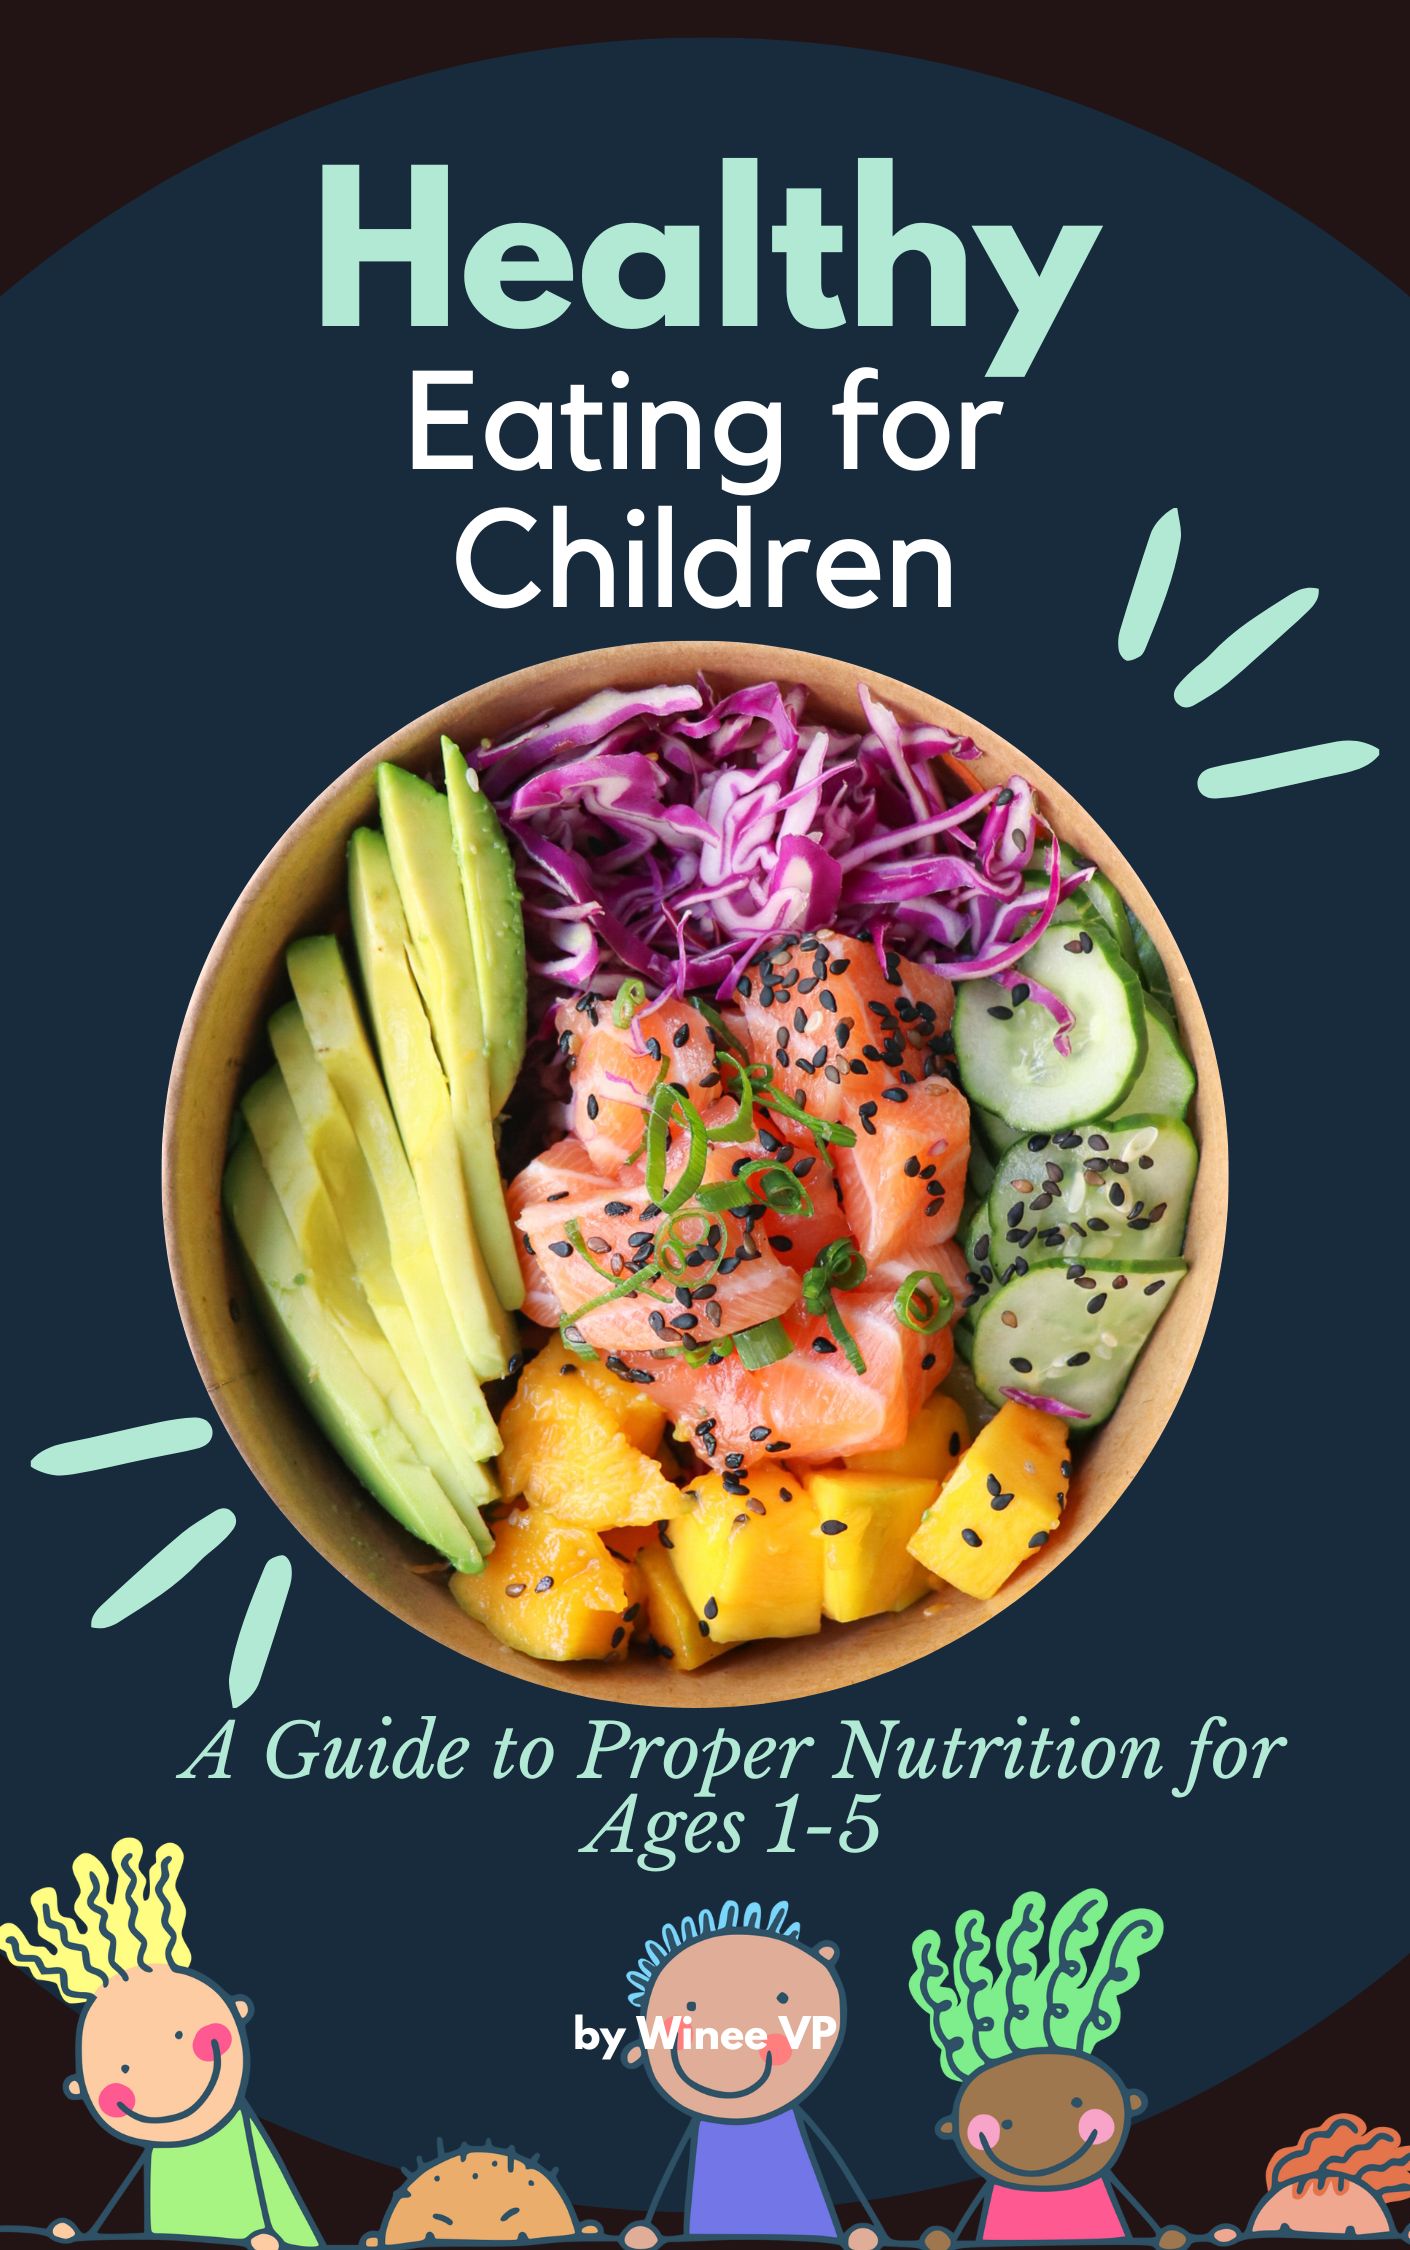 “Healthy Eating for Children: A Guide to Proper Nutrition for Ages 1-5”